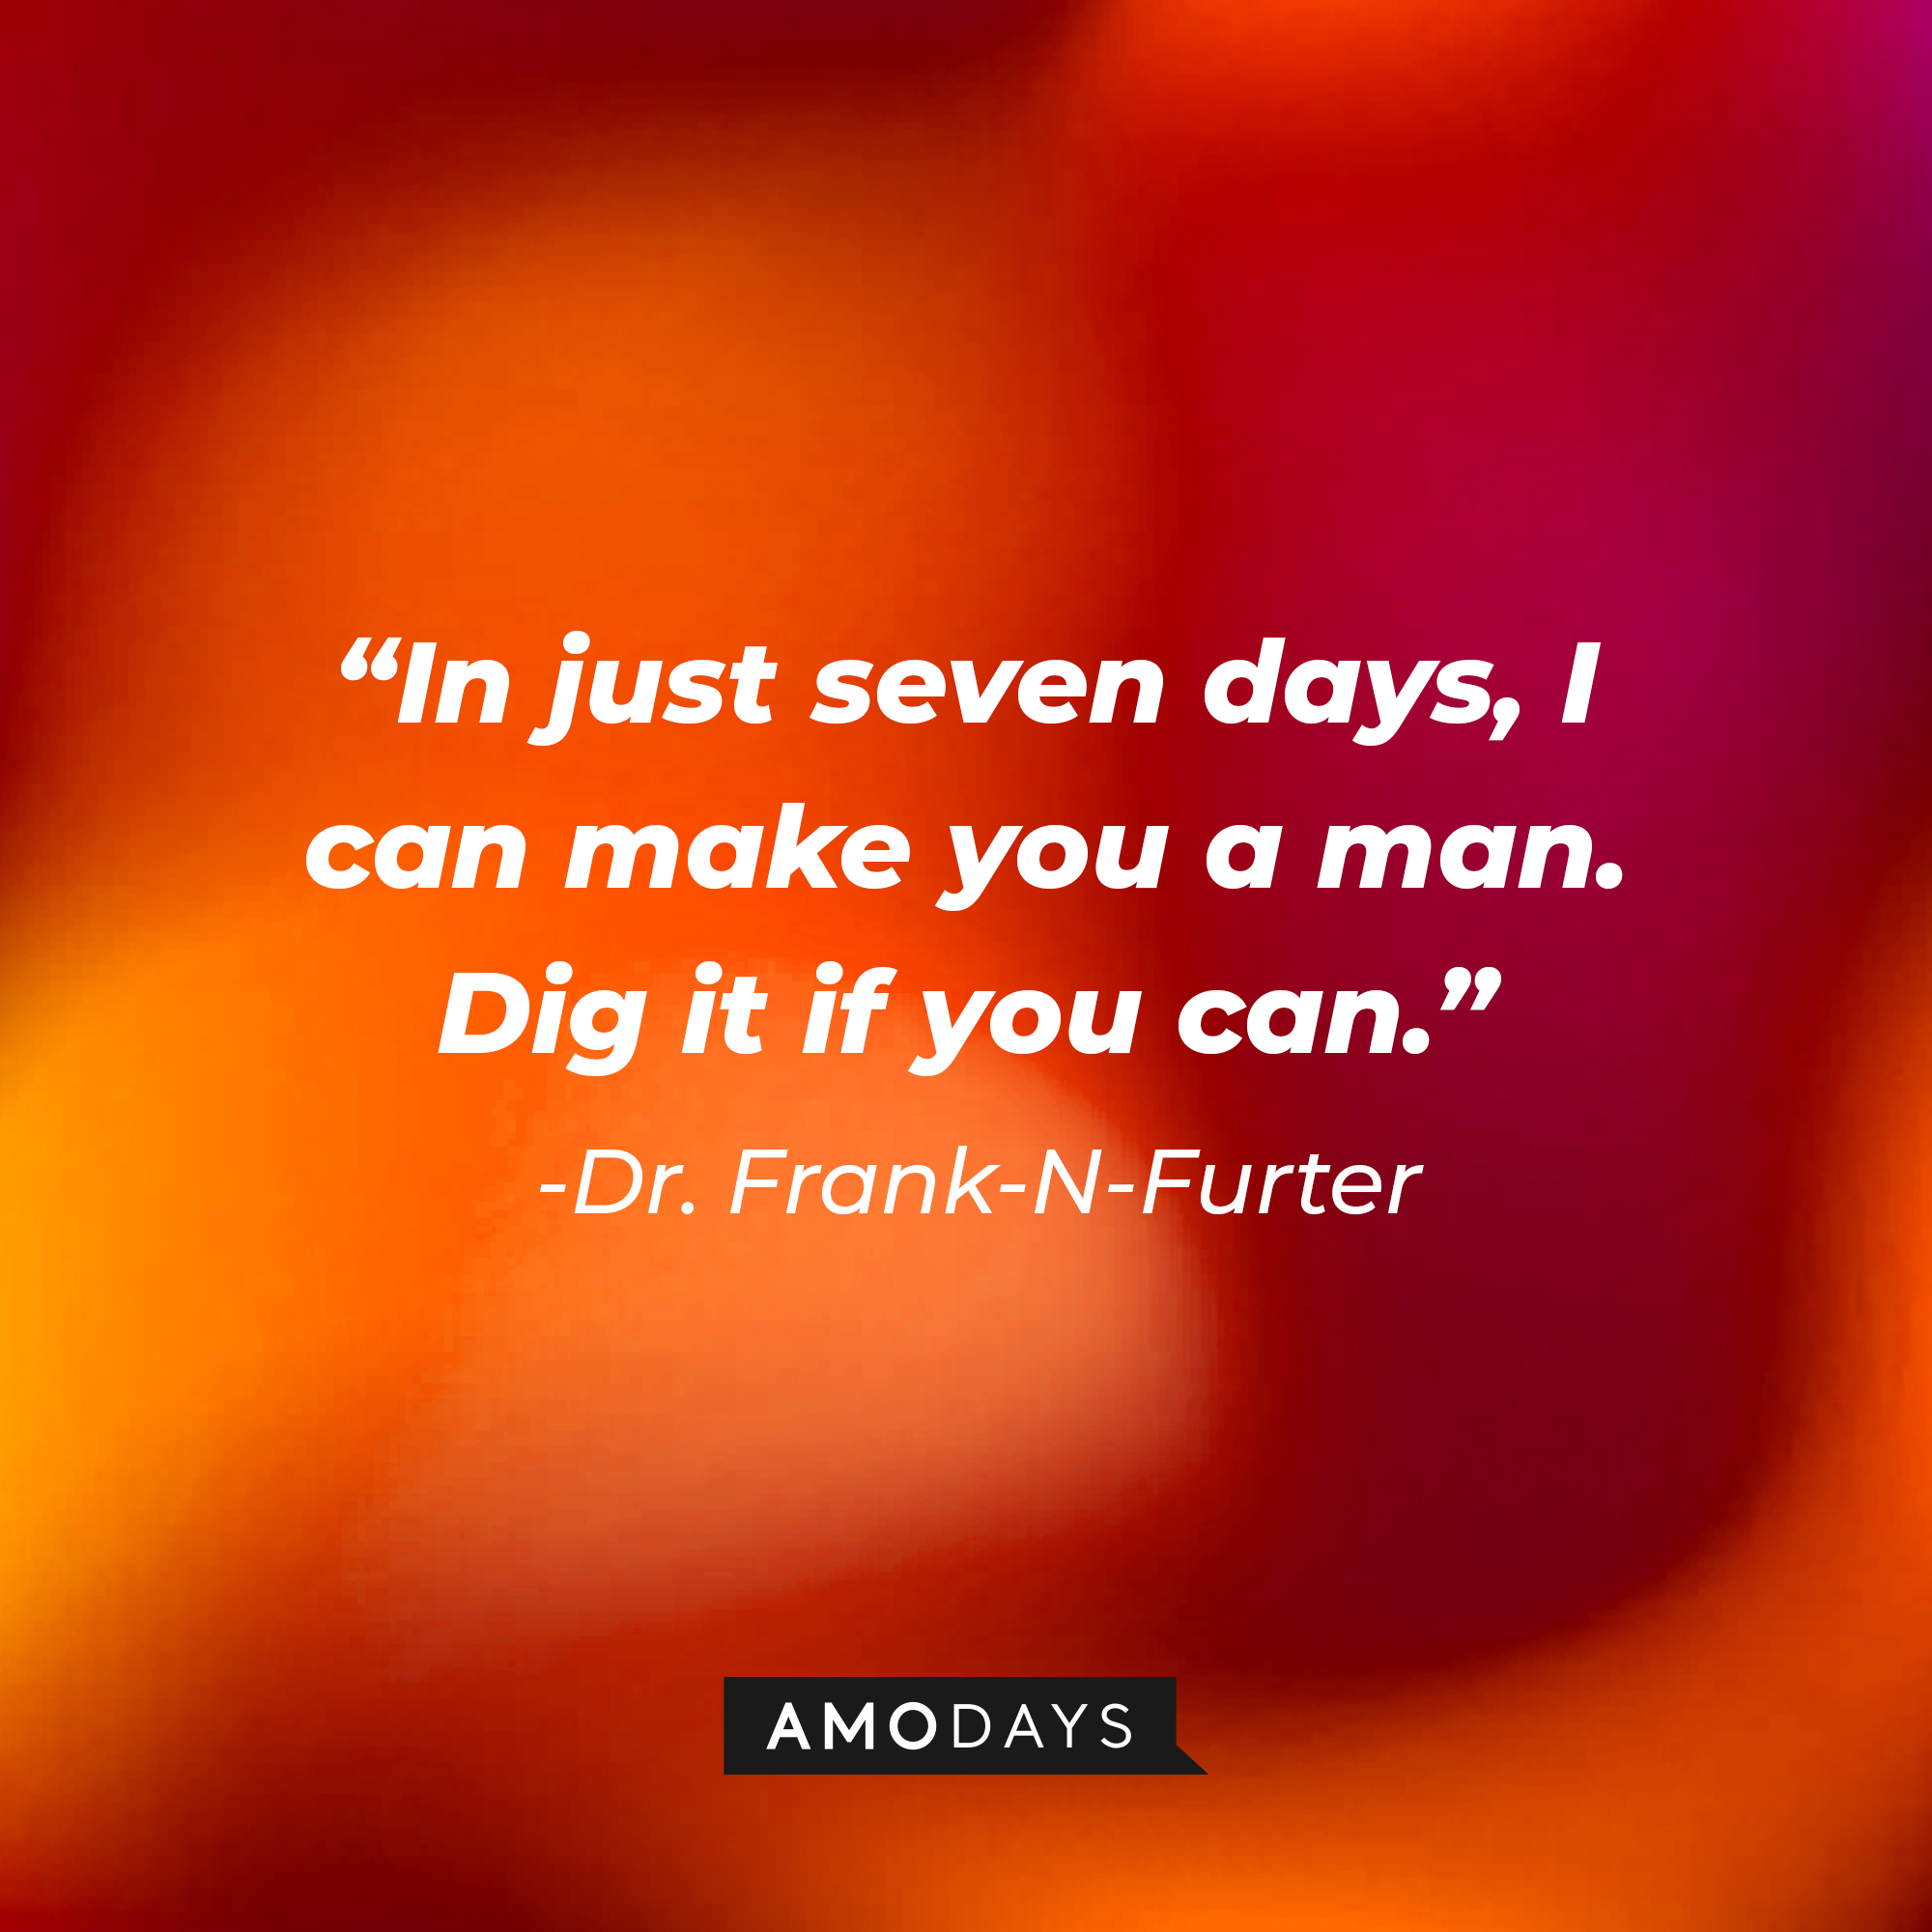 Dr. Frank-N-Furter's quote: "In just seven days, I can make you a man. Dig it if you can." | Source: AmoDays